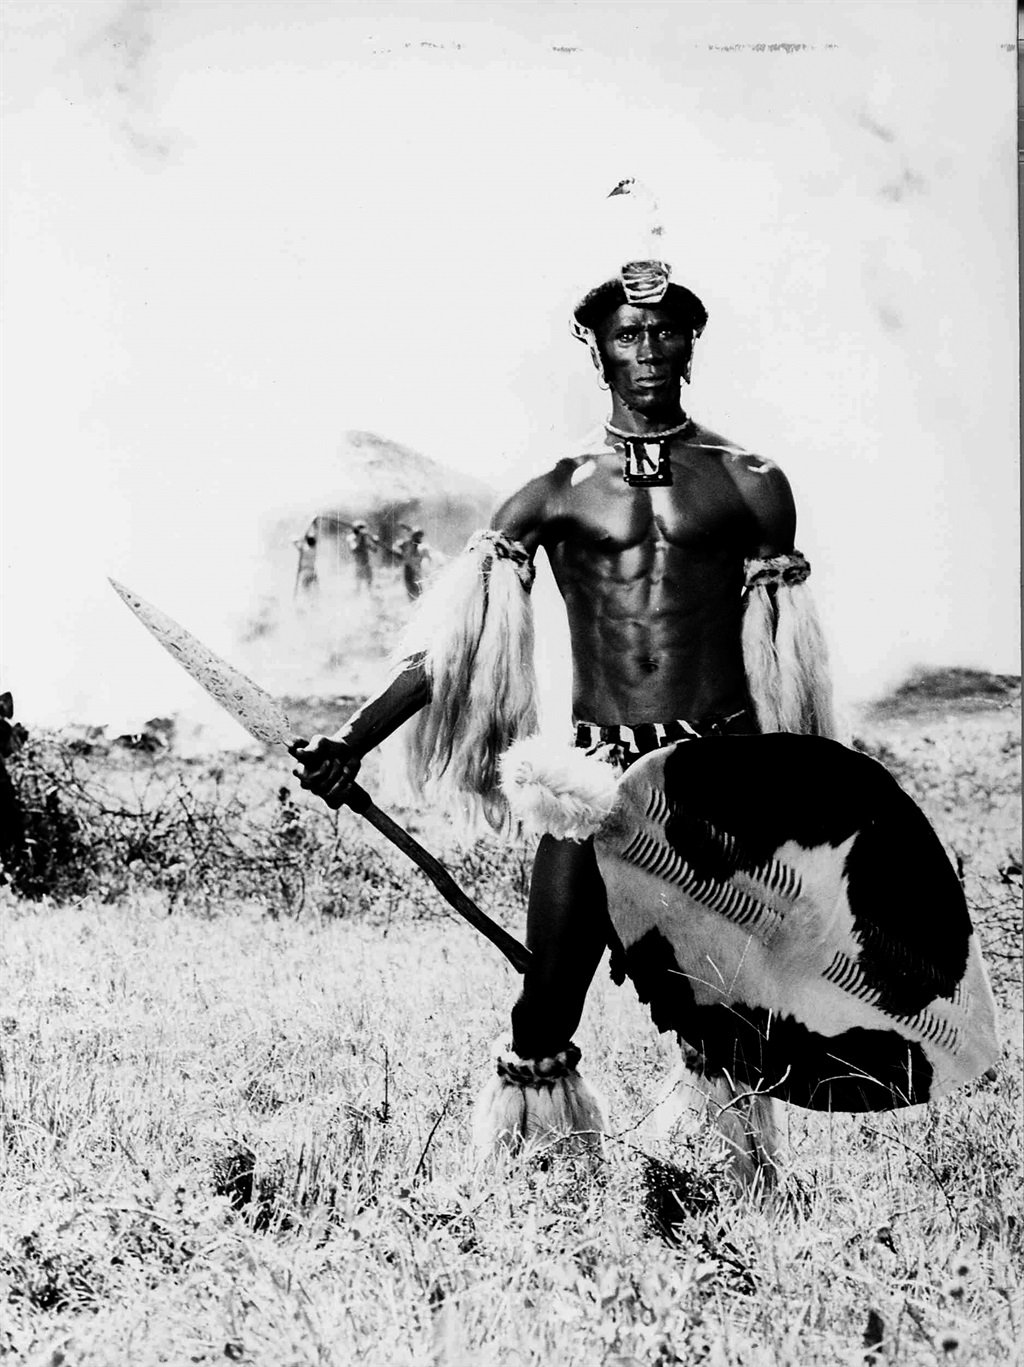 fit for a king Henry Cele as Shaka in the 1986 SABC production